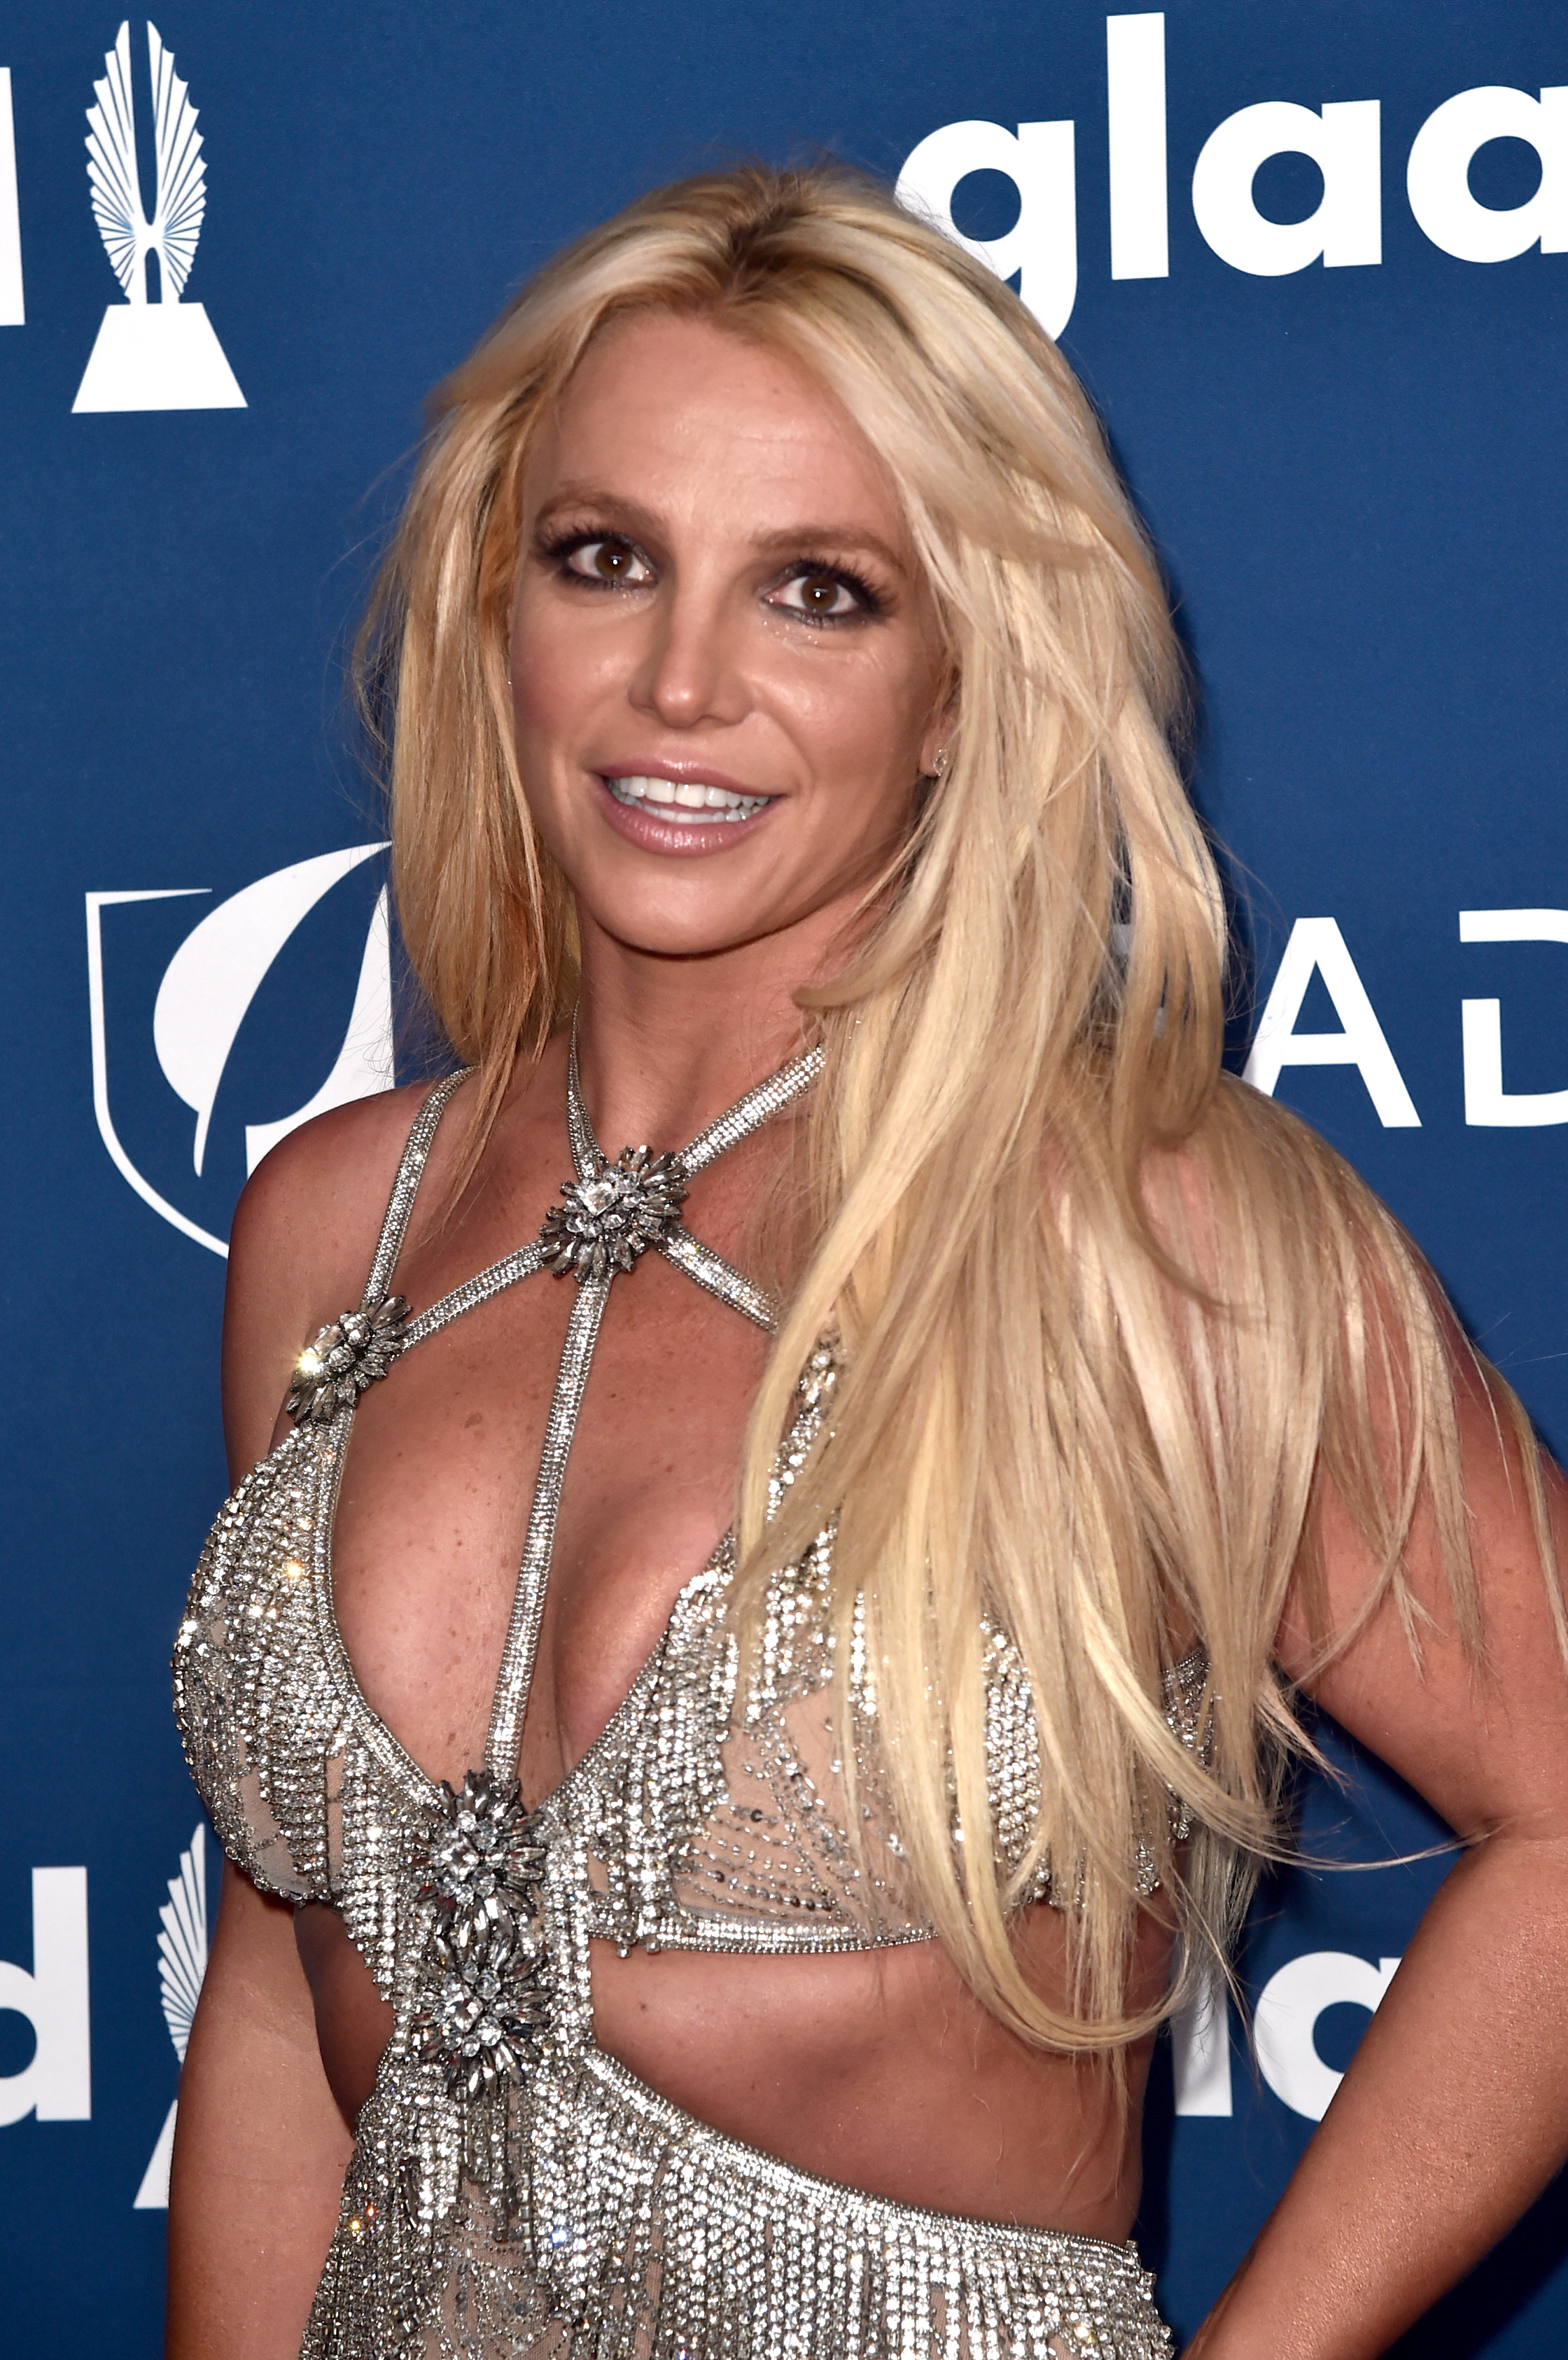 Britney Spears posing in a bejeweled dress with a plunging neckline at a glaad event